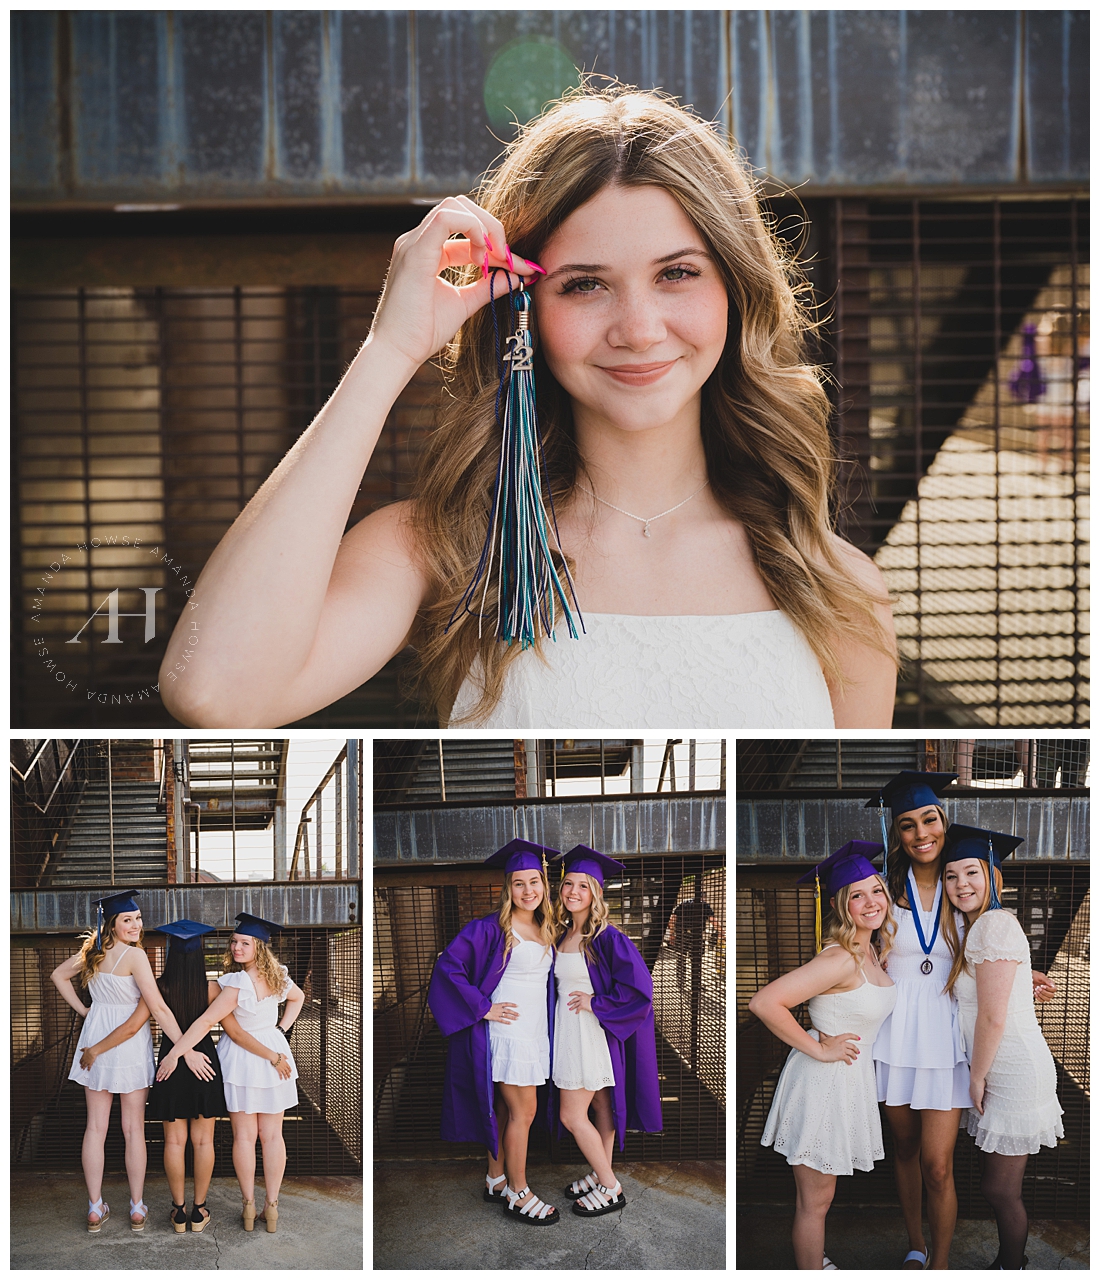 Graduation Portraits With Your Best Friends | How to Style a White Dress for Graduation, Hair and Makeup Inspo for High School Seniors | Photographed by the Best Tacoma Senior Portrait Photographer Amanda Howse